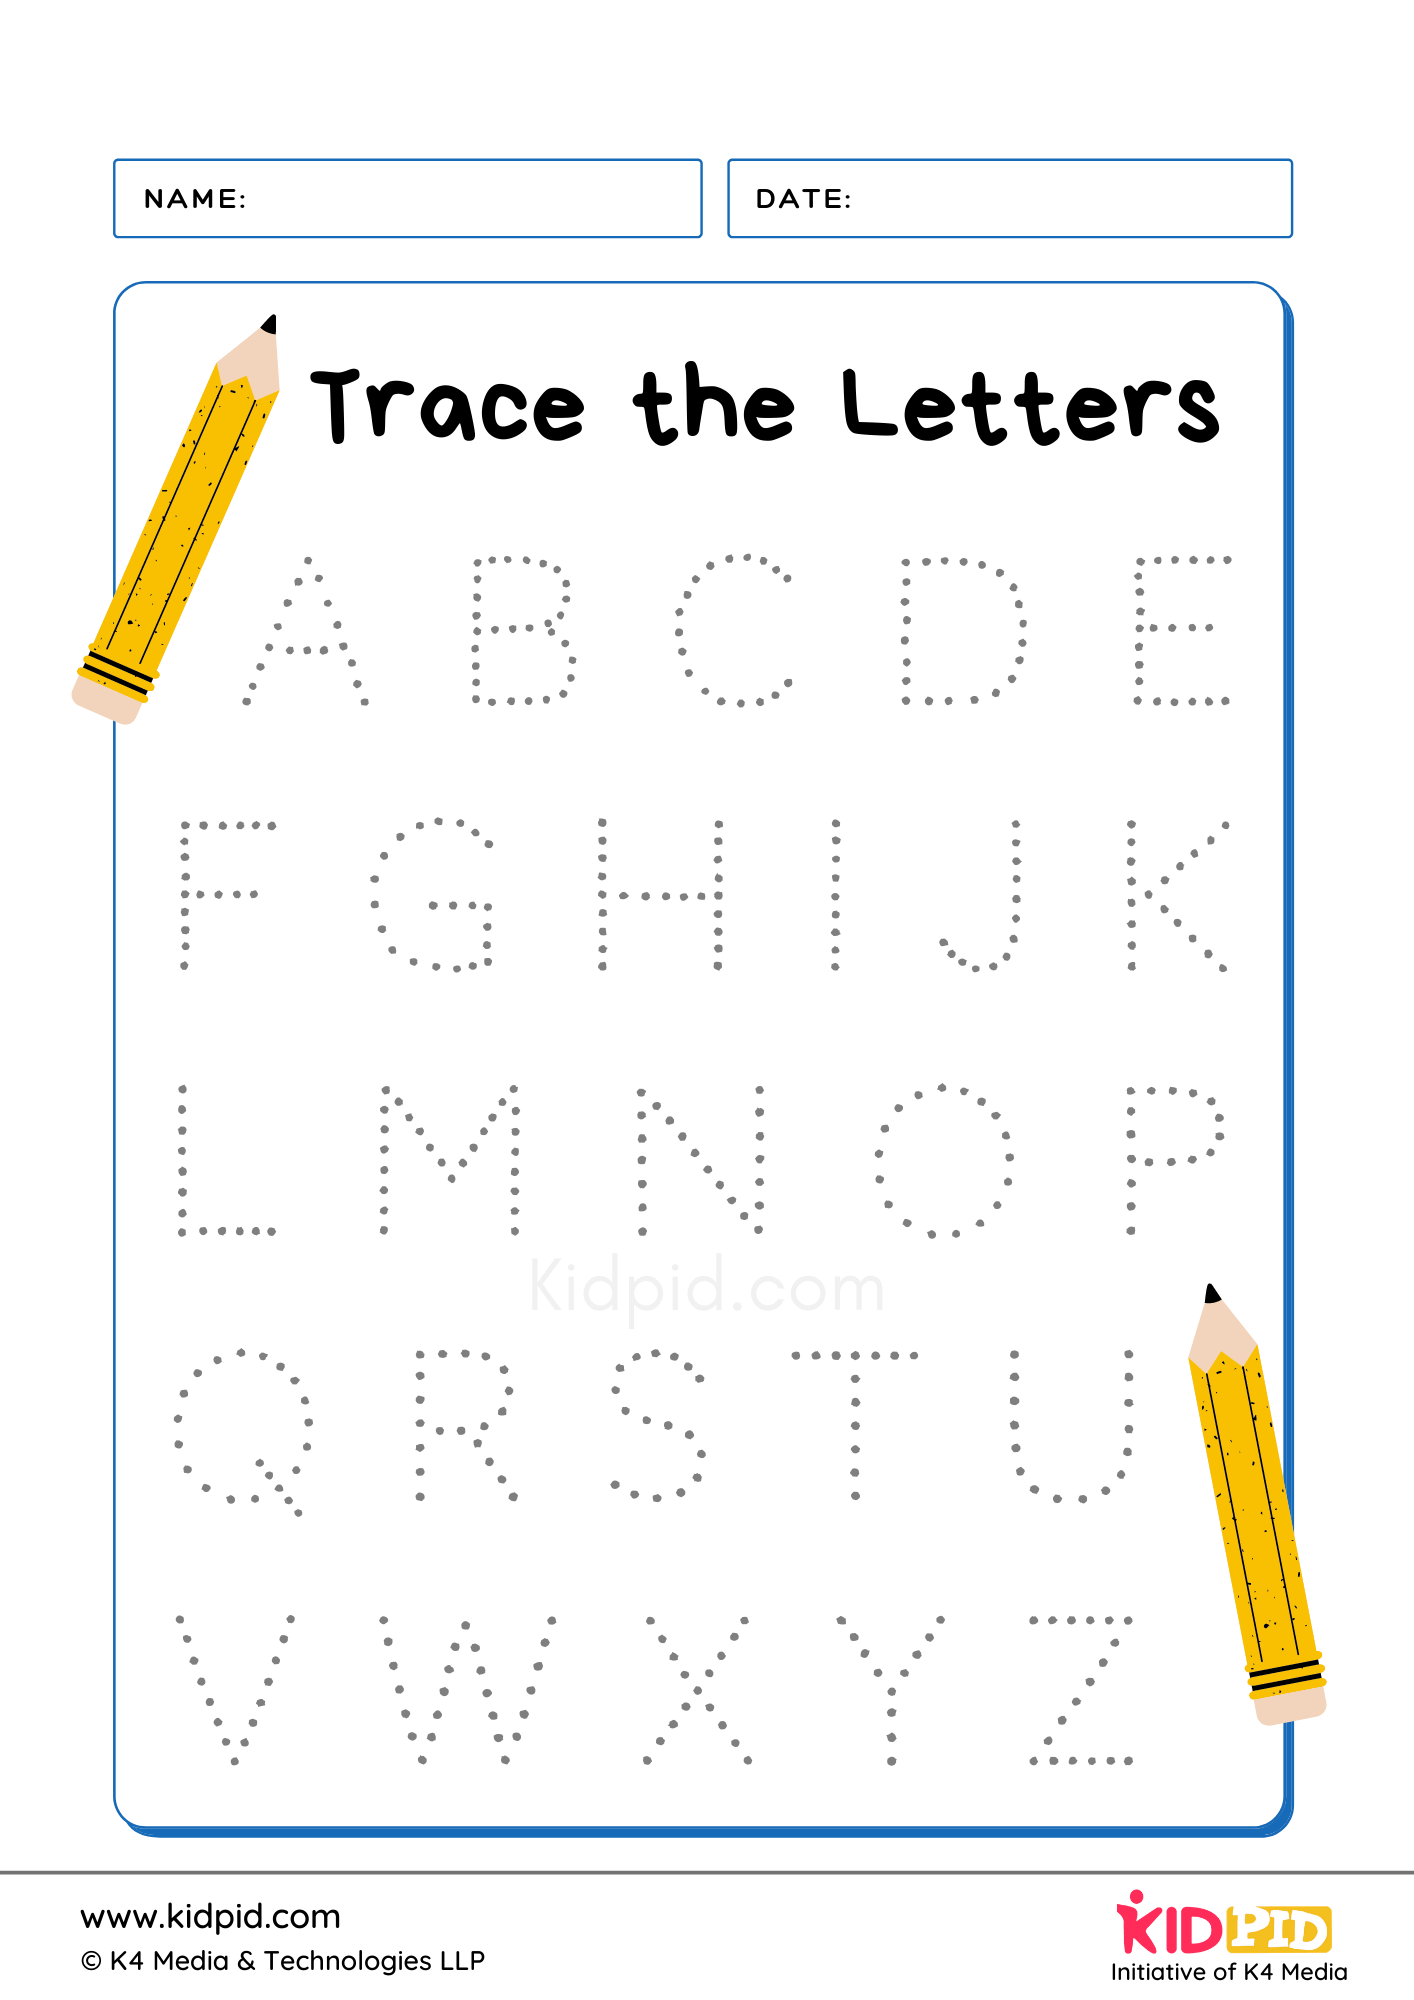 Letter Sequence Writing/Words Foundational Worksheet - Kidpid